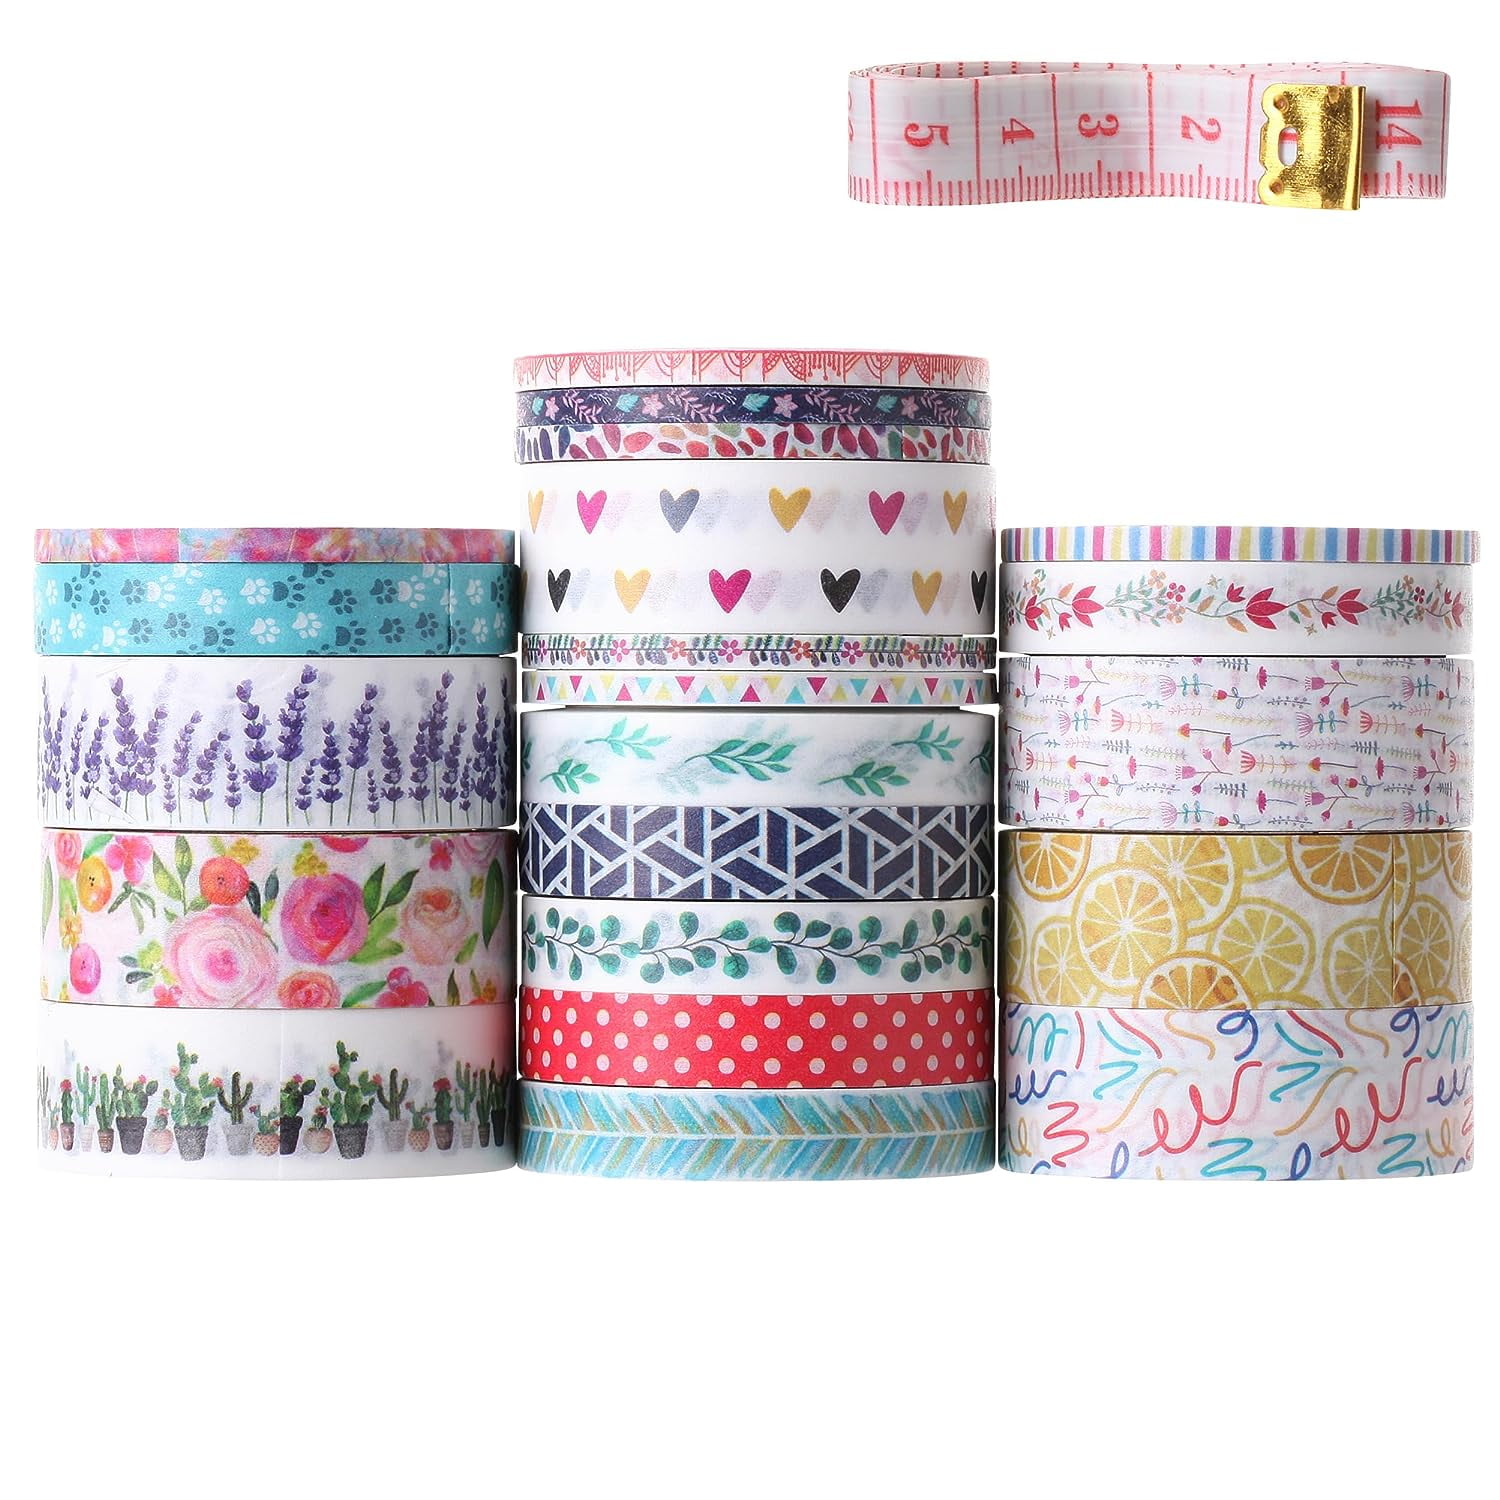 Washi Tape Lots for sale in Houston, Texas, Facebook Marketplace